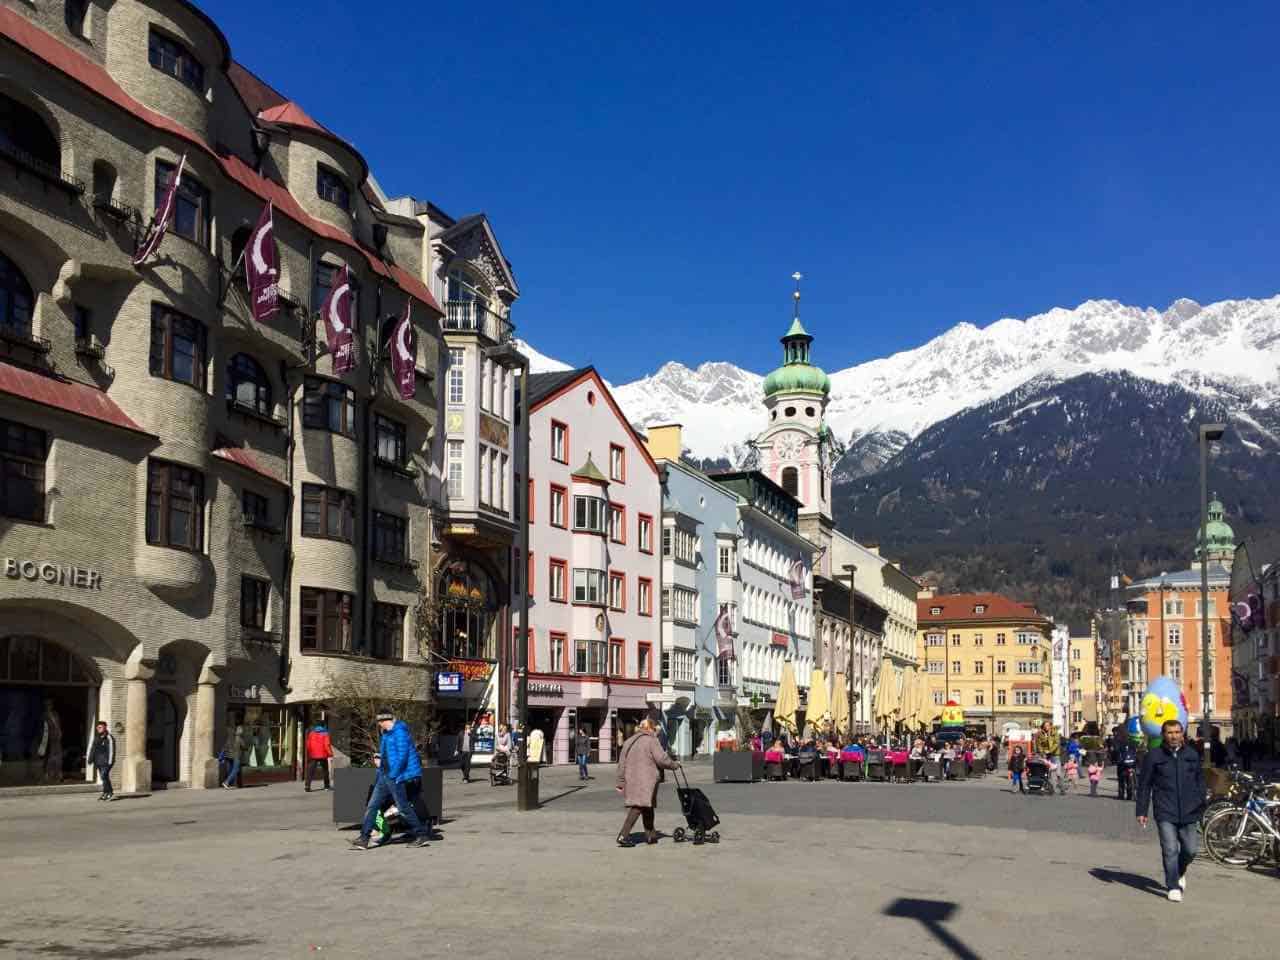 Innsbruck - Beautiful places to visit in Austria